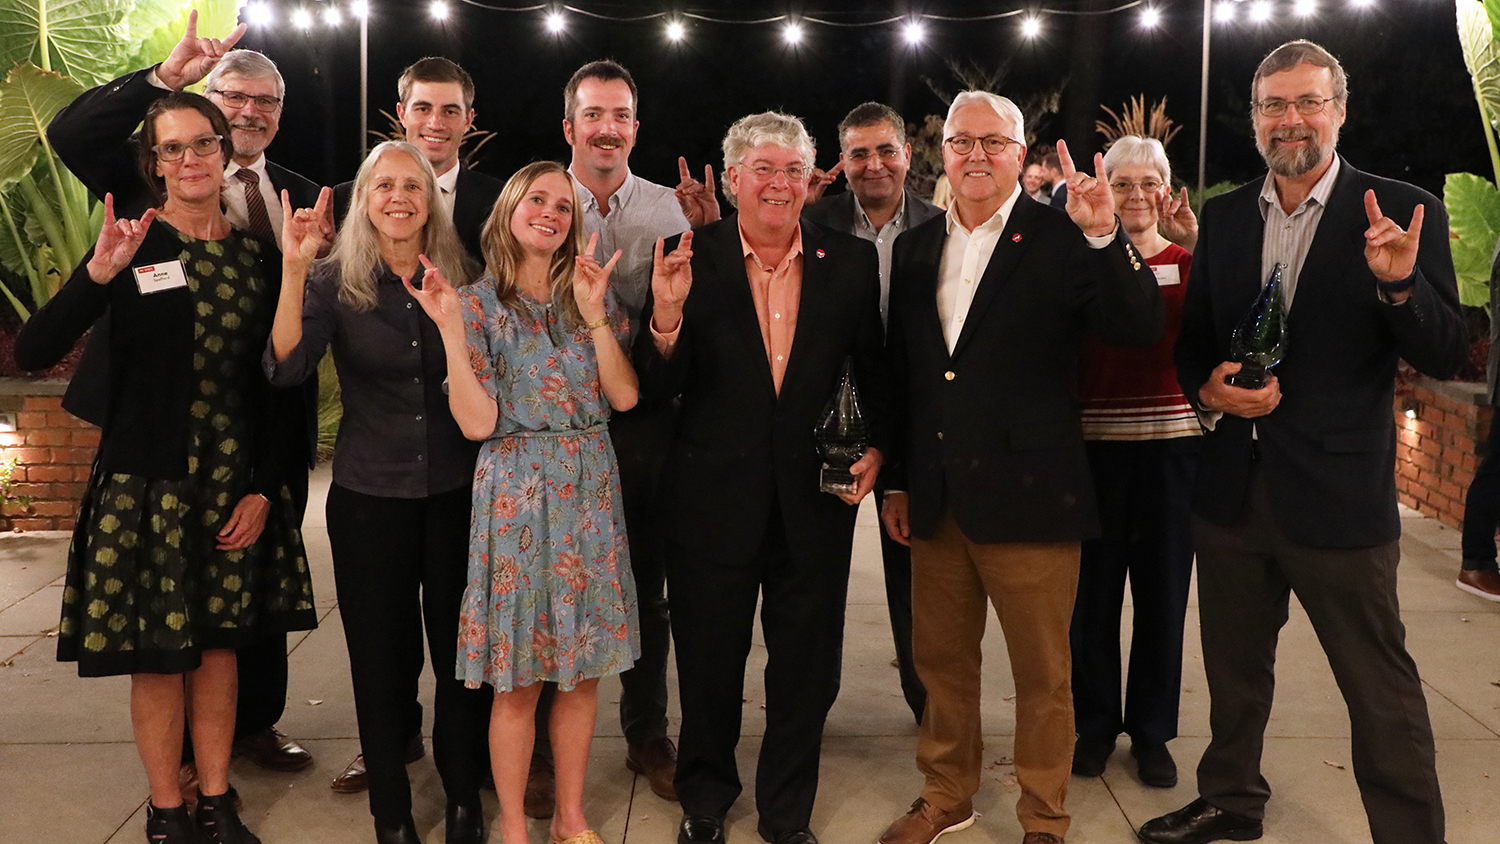 Members of the College of Agriculture's Sweetpotato Breeding and Genetics Program pose with Chancellor Randy Woodson, holding up the "wolf" hand sign.